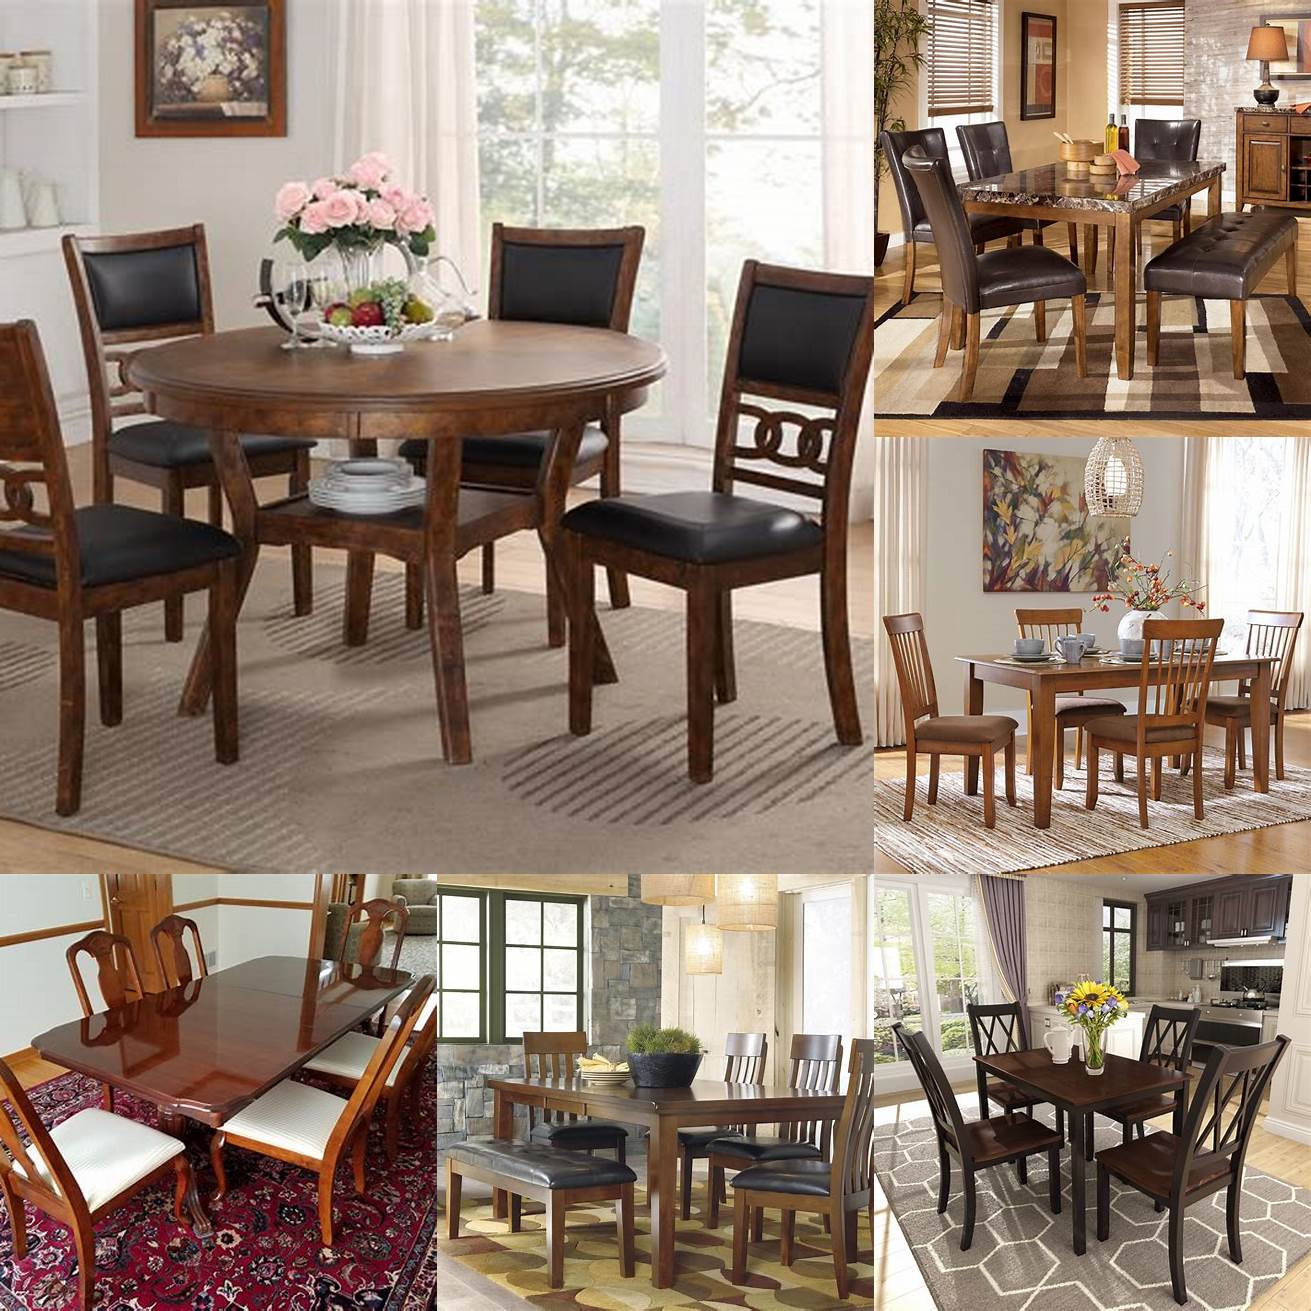 A dining table and chairs set